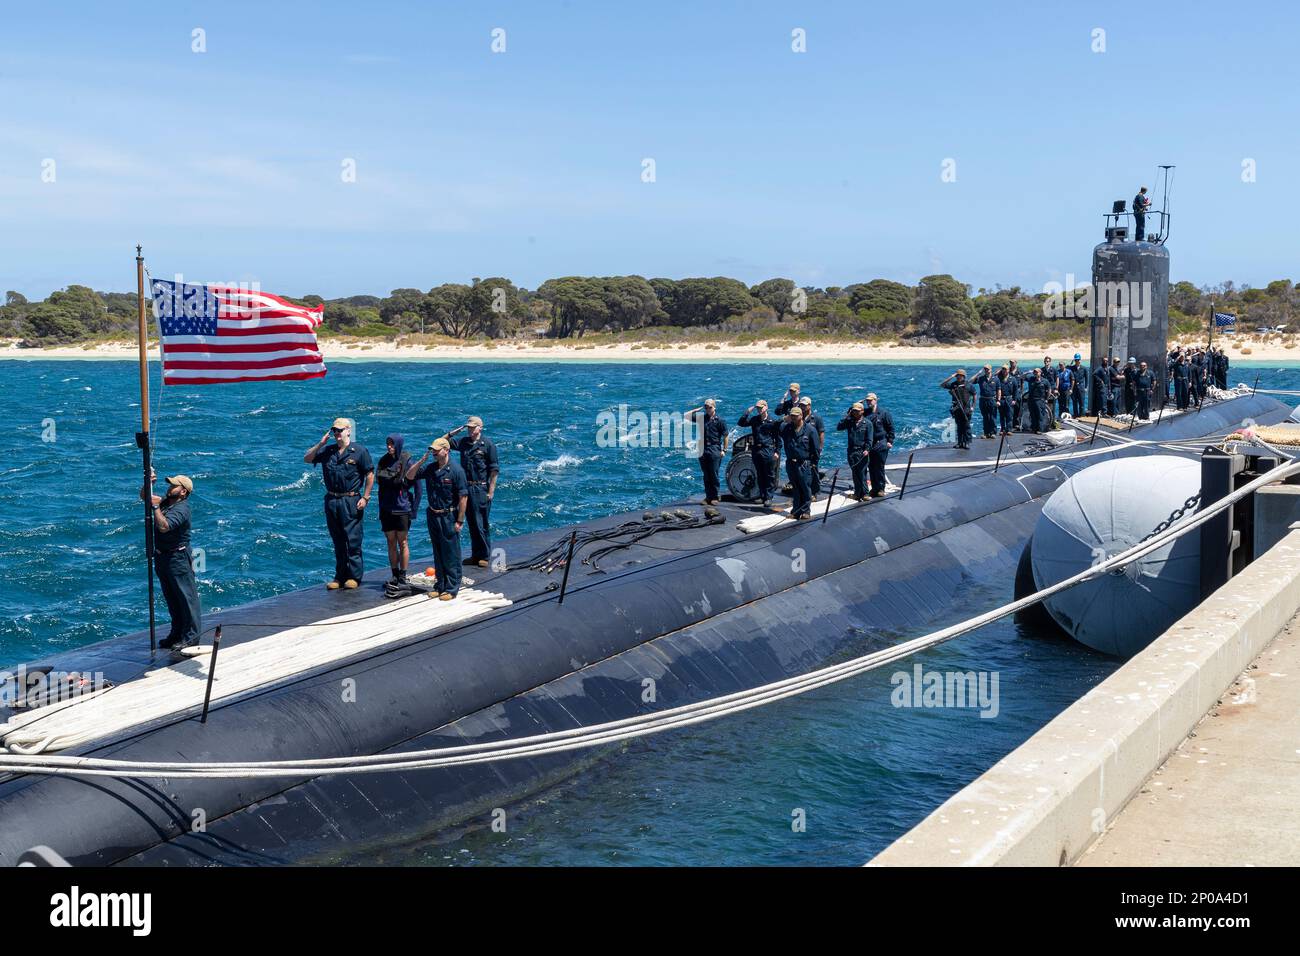 GARDEN ISLAND, Australia – Sailors assigned to the Los Angeles-class fast-attack submarine USS Asheville (SSN 758) salute the national ensign after arriving at Royal Australian Navy HMAS Stirling Naval Base, Feb. 27. Asheville is currently on patrol in support of national security interests in the U.S. 7th Fleet area of operations. (Courtesy photo by Australia Department of Defence) Stock Photo